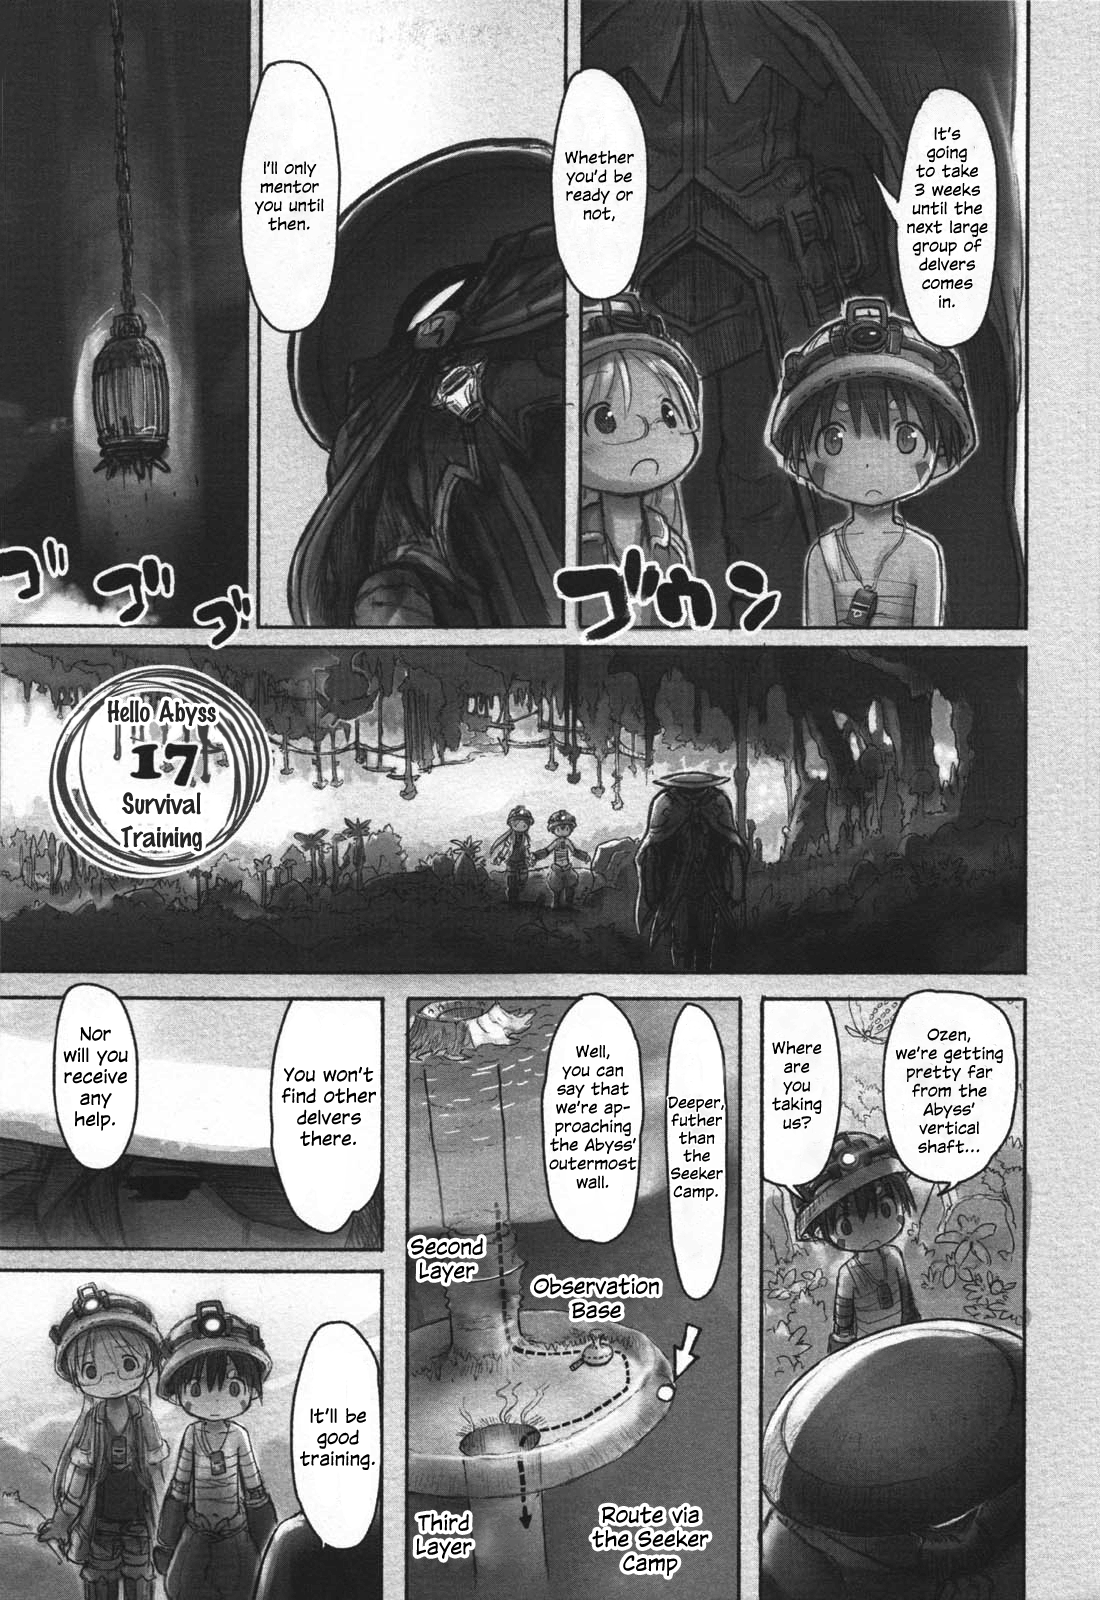 Made in Abyss Volume 08, Made in Abyss Wiki